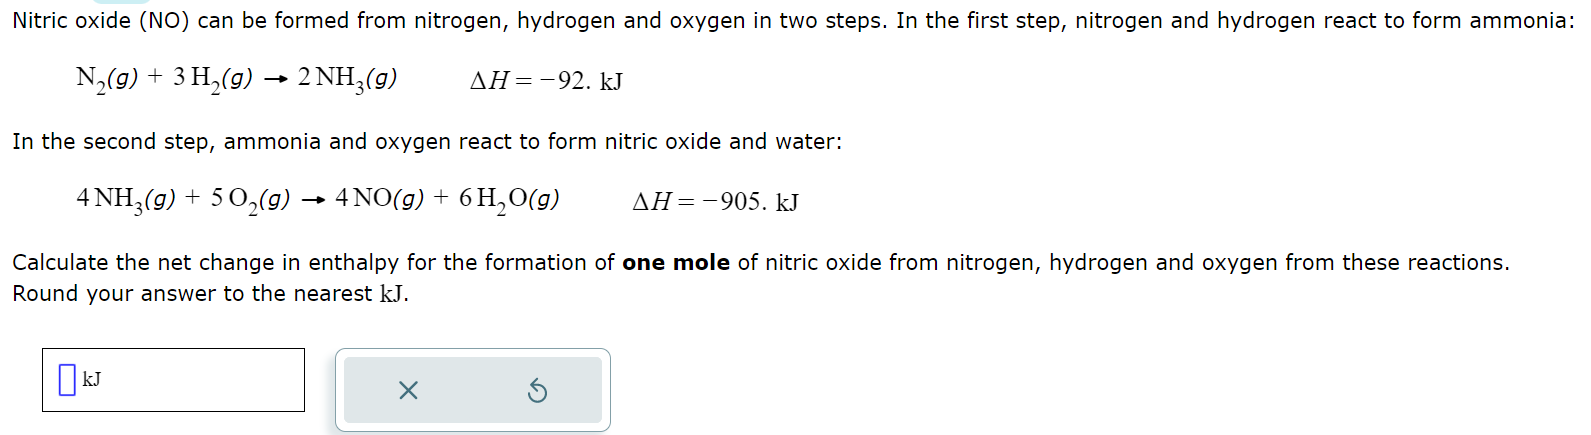 solved-nitric-oxide-no-can-be-formed-from-nitrogen-chegg